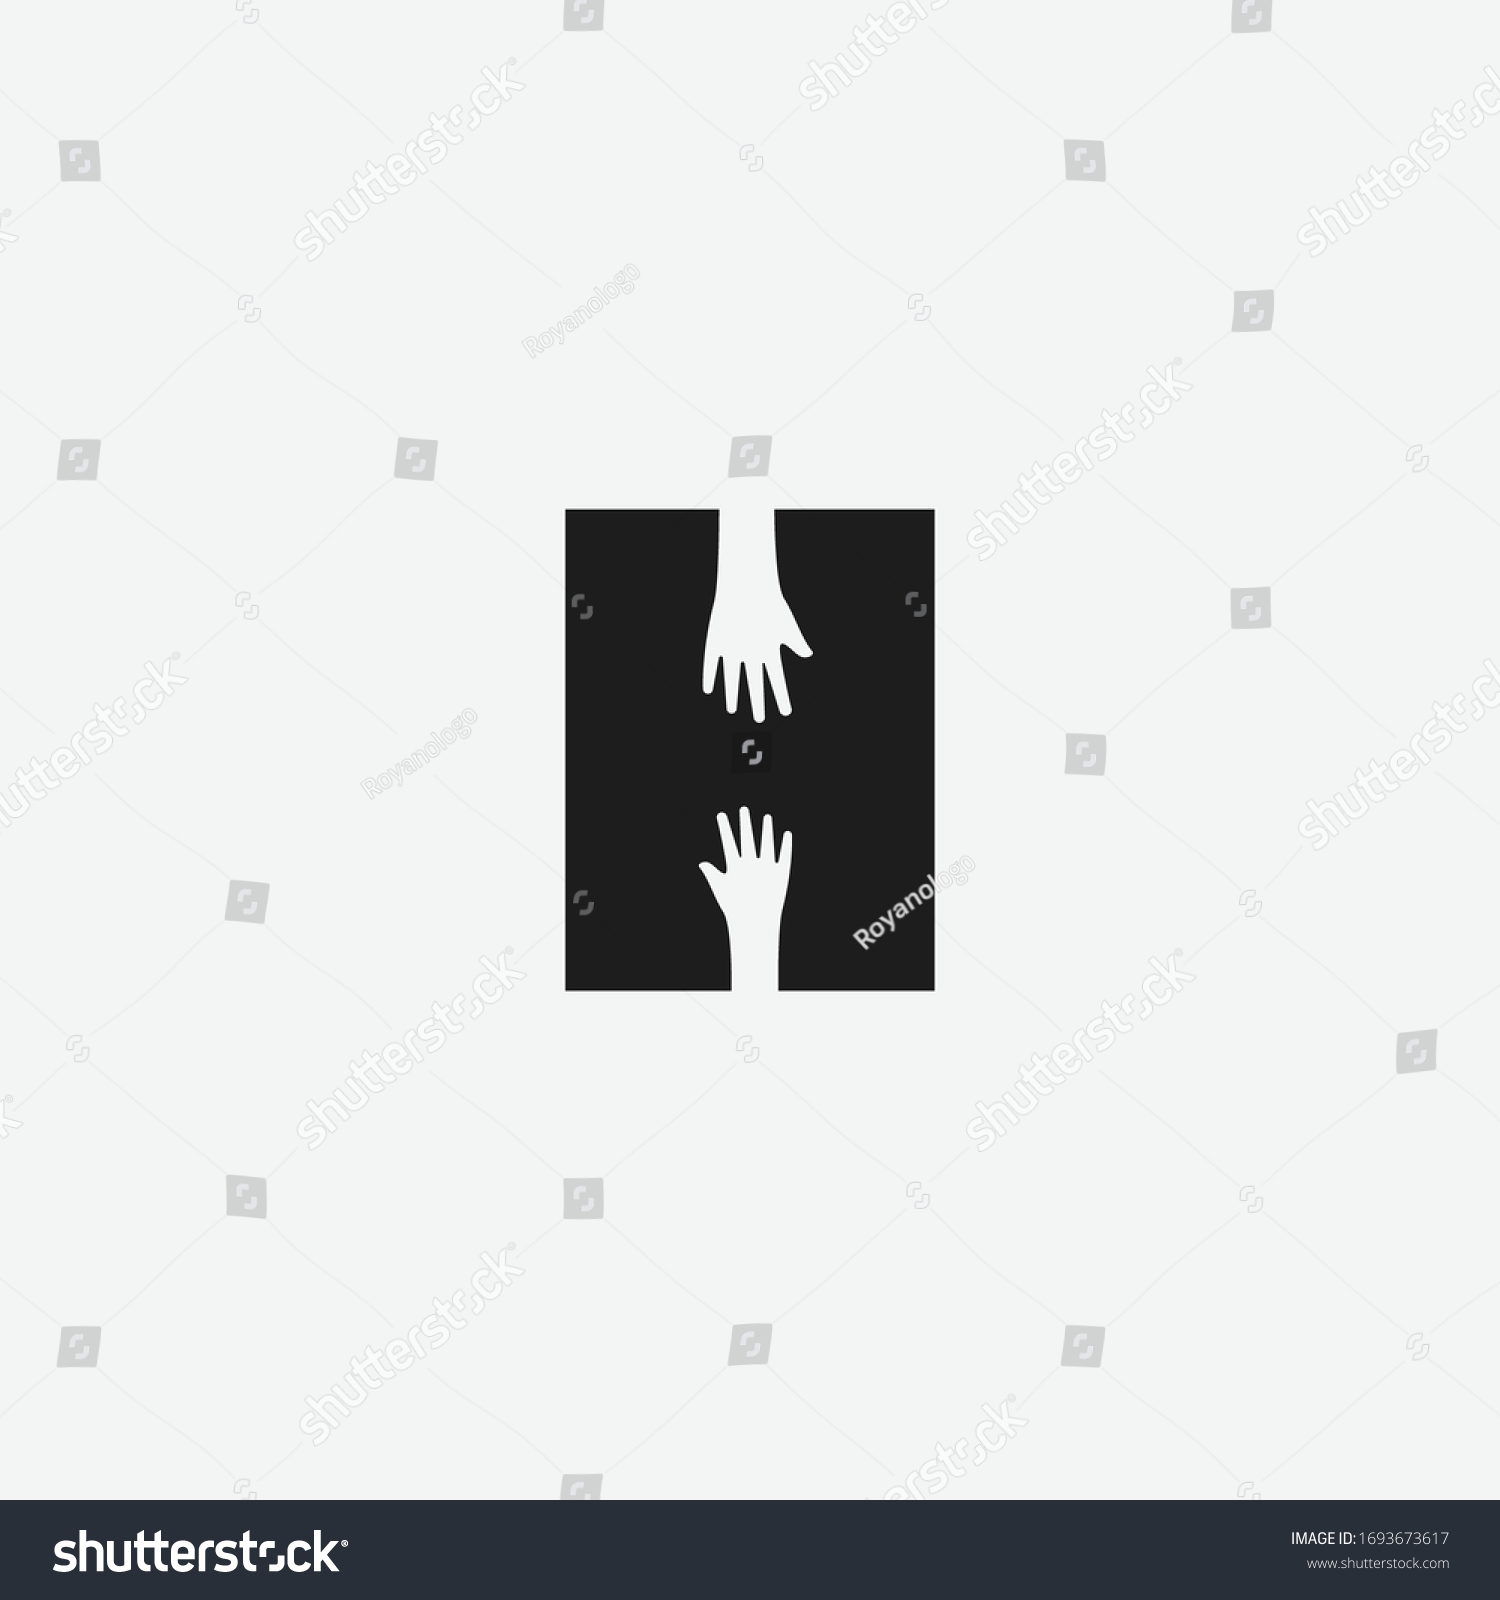 Letter H with negative space hand logo icon sign vector template #1693673617